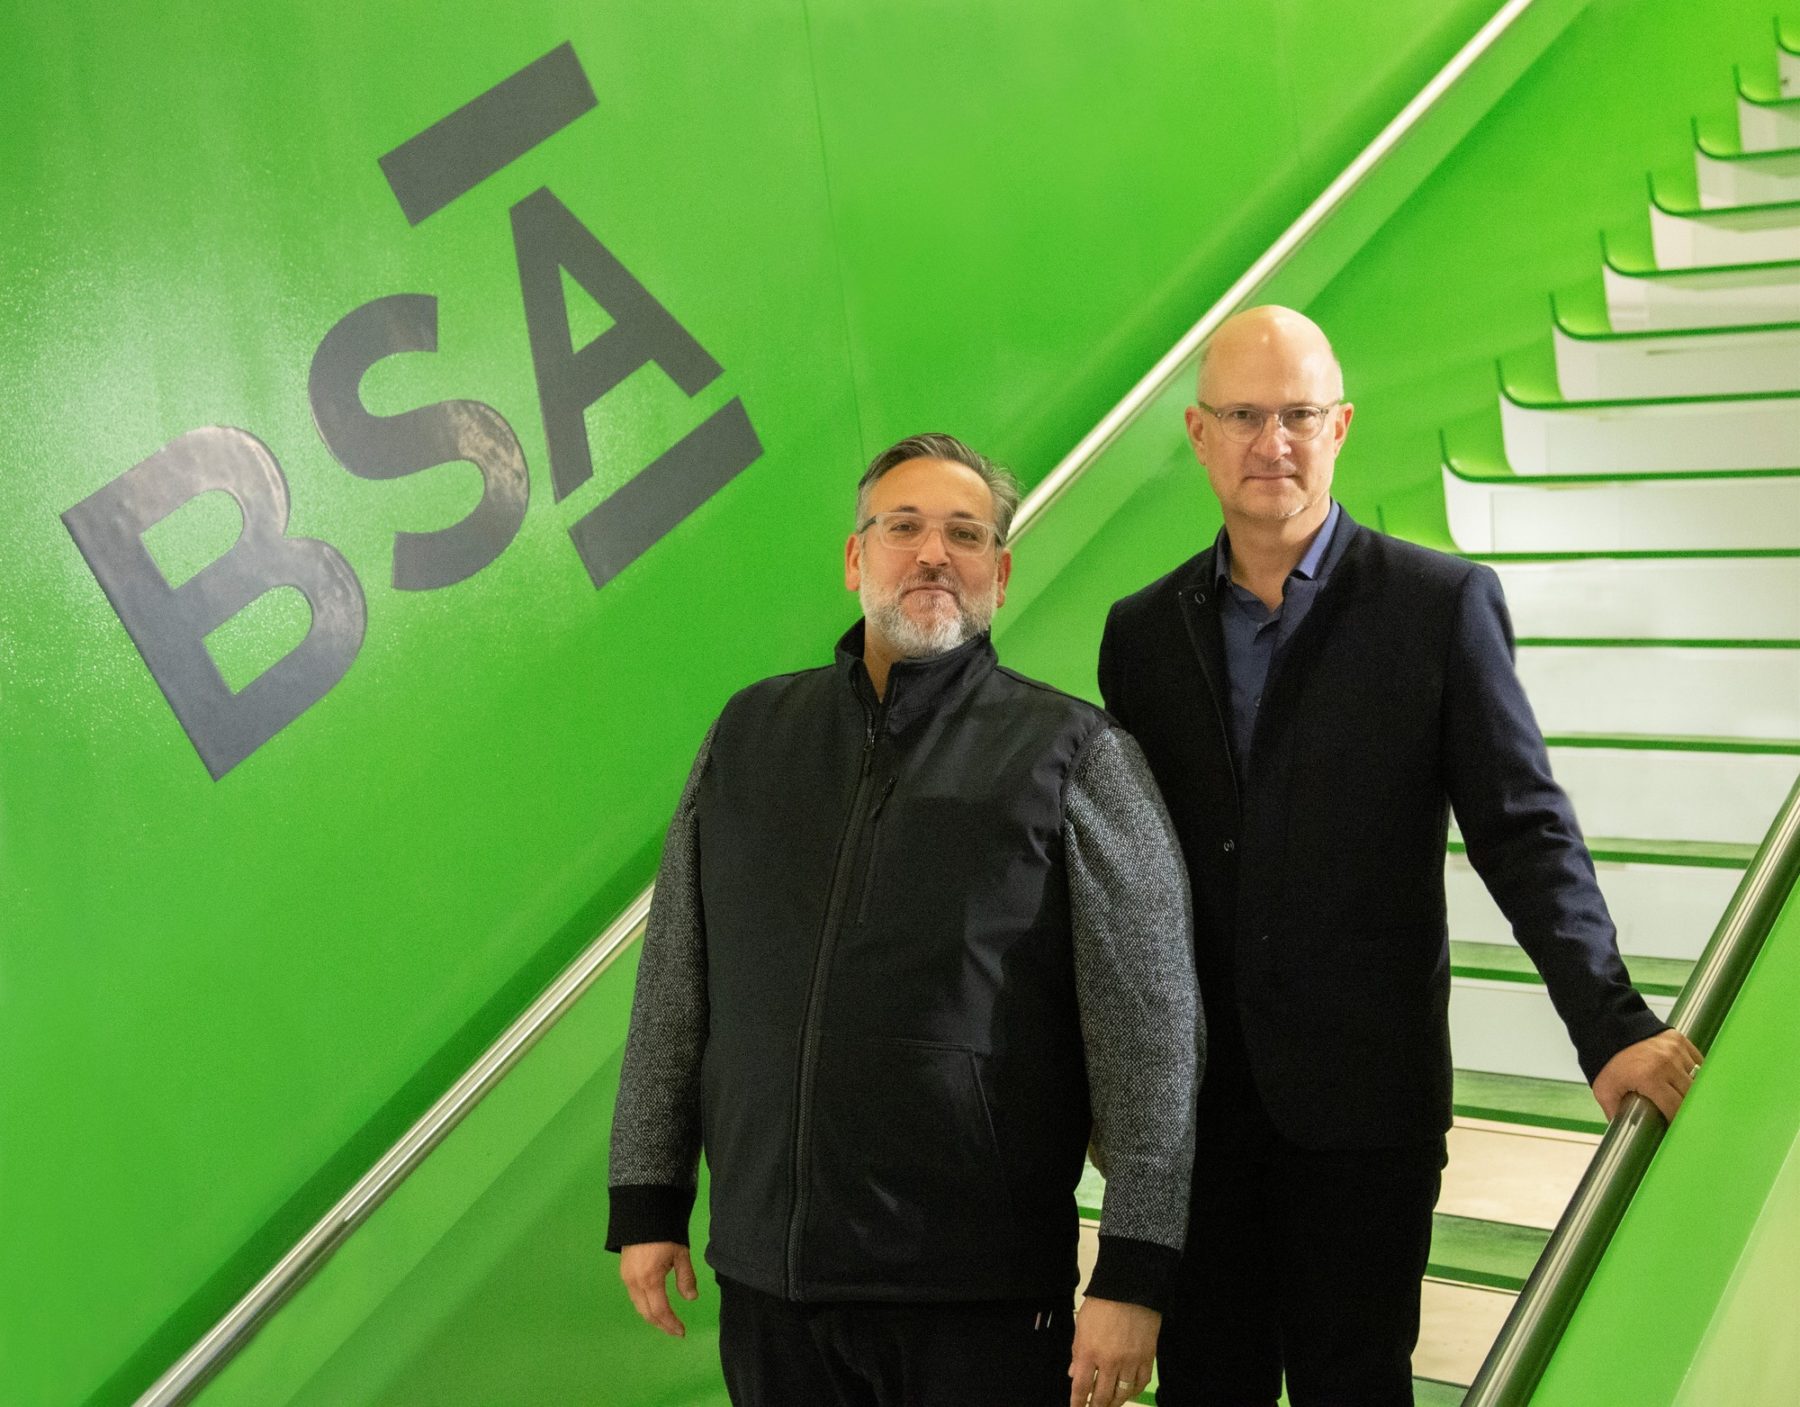 Two people standing on stairs, large BSA logo on wall behind them